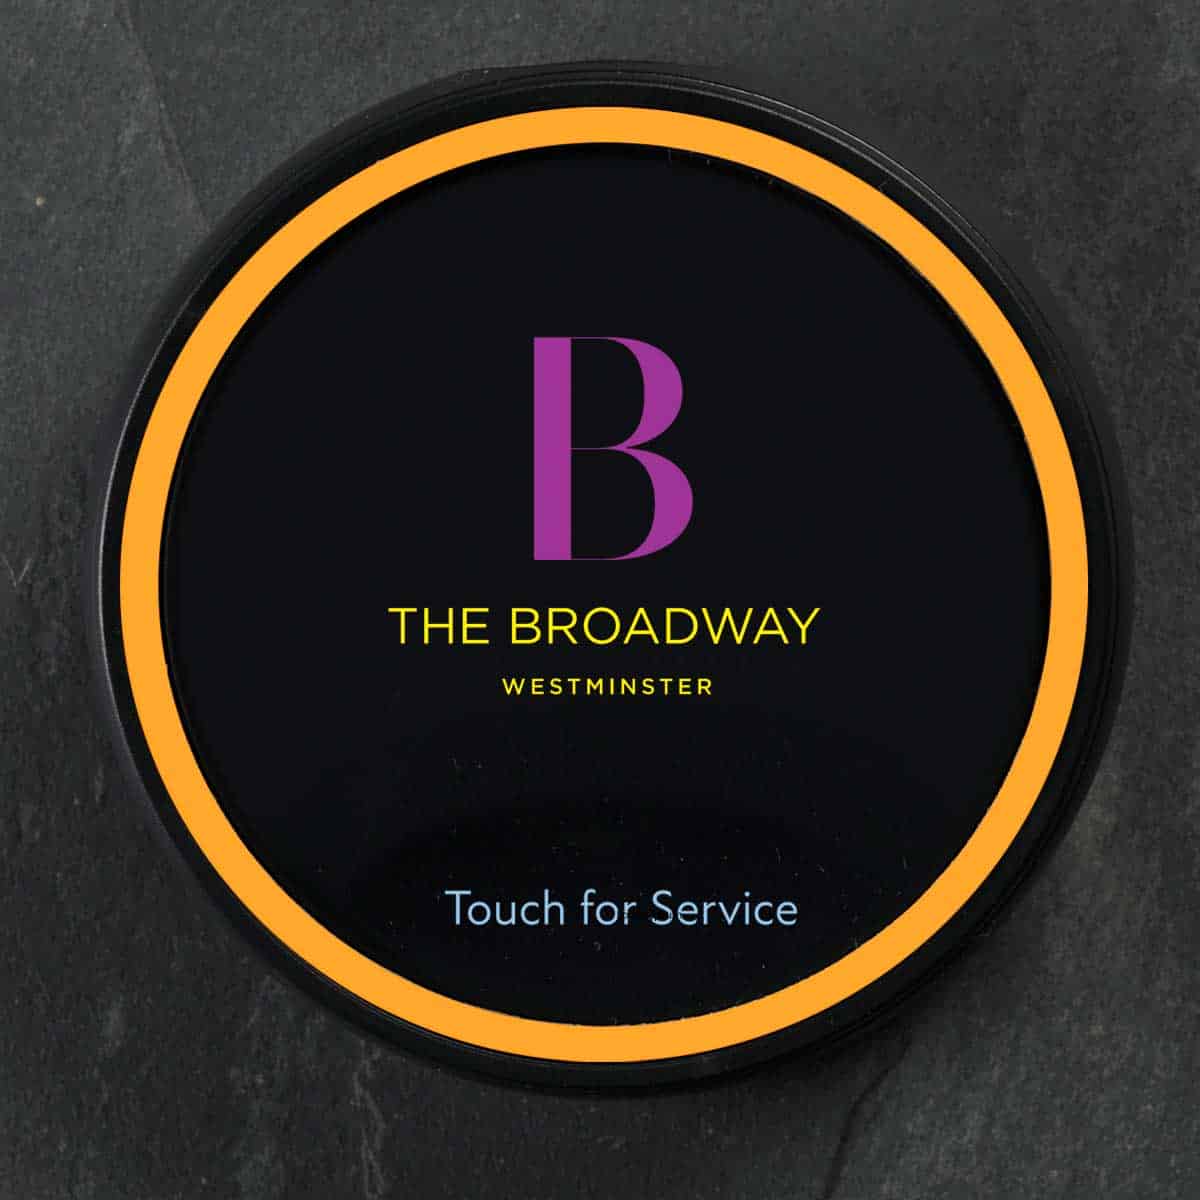 The Broadway residences call for service button - charcoal